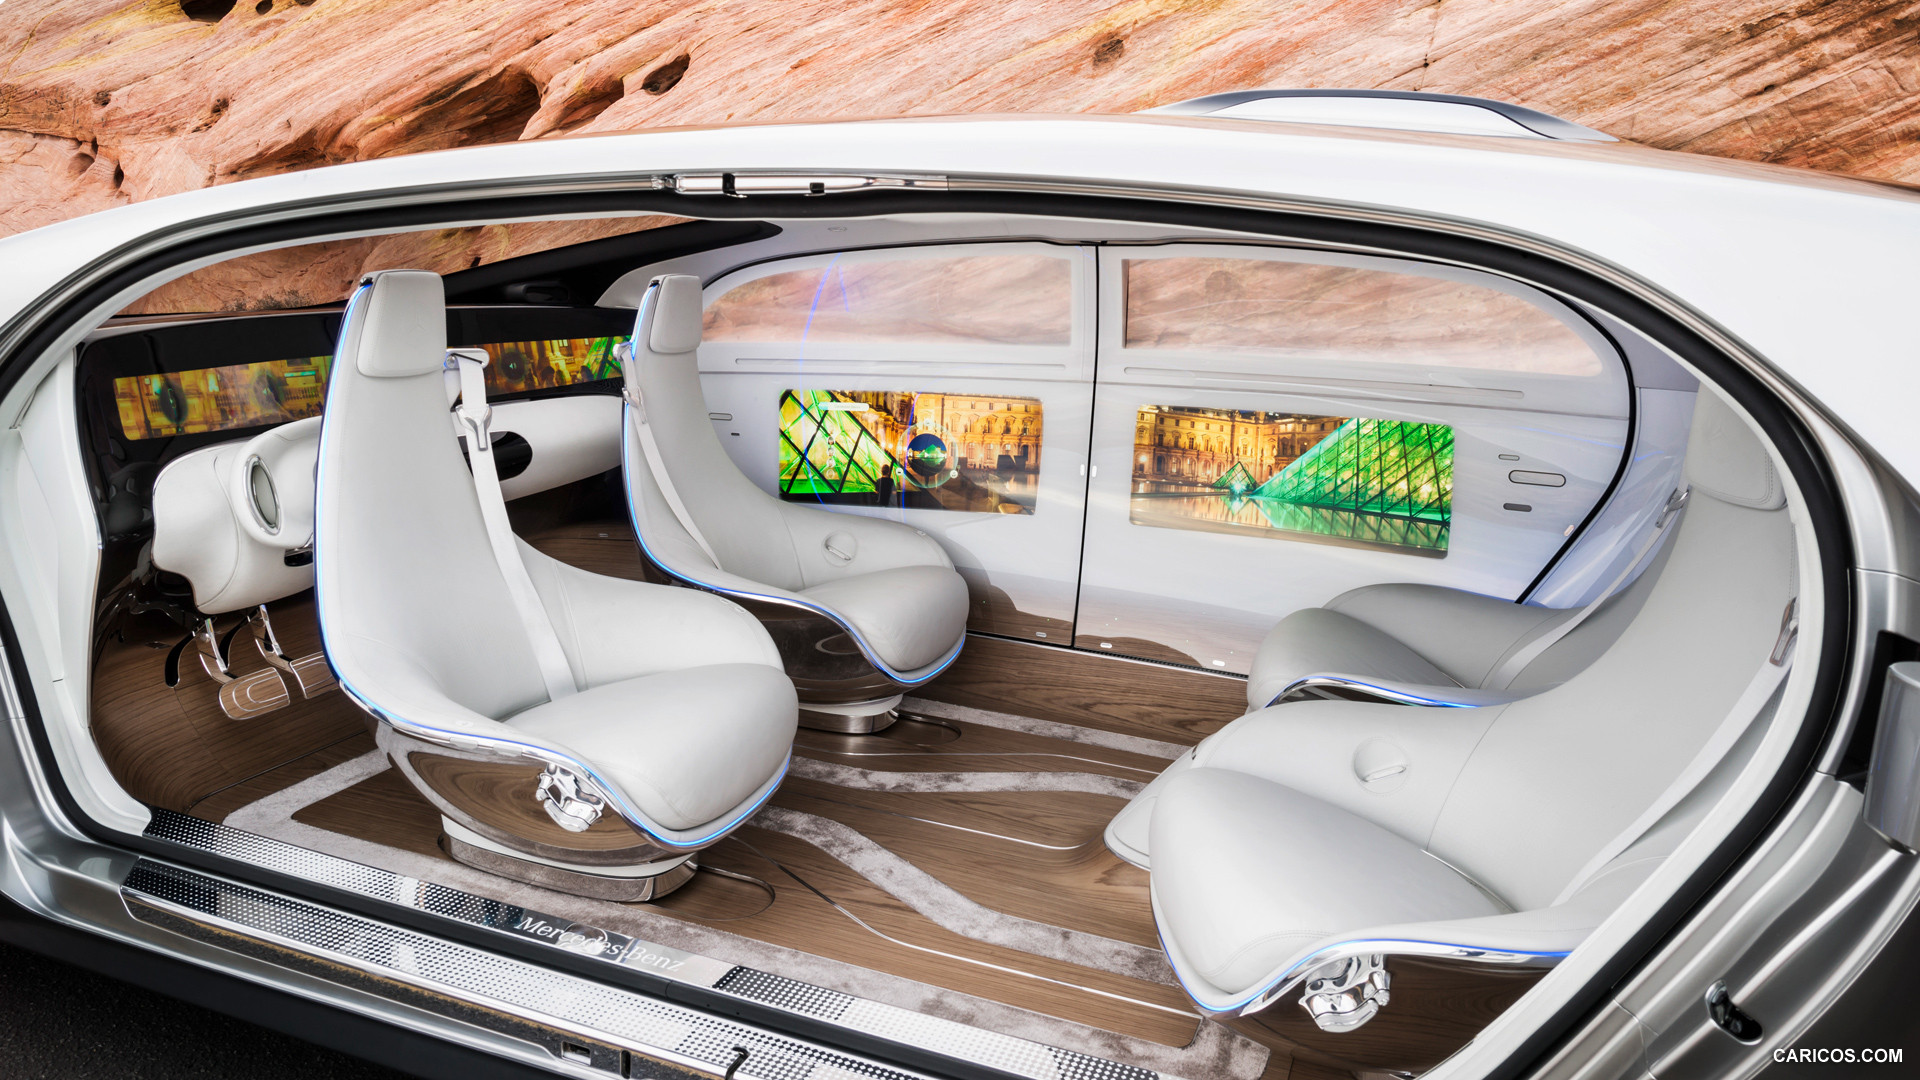 2015 Mercedes-Benz F 015 Luxury in Motion Concept  - Interior, #27 of 92